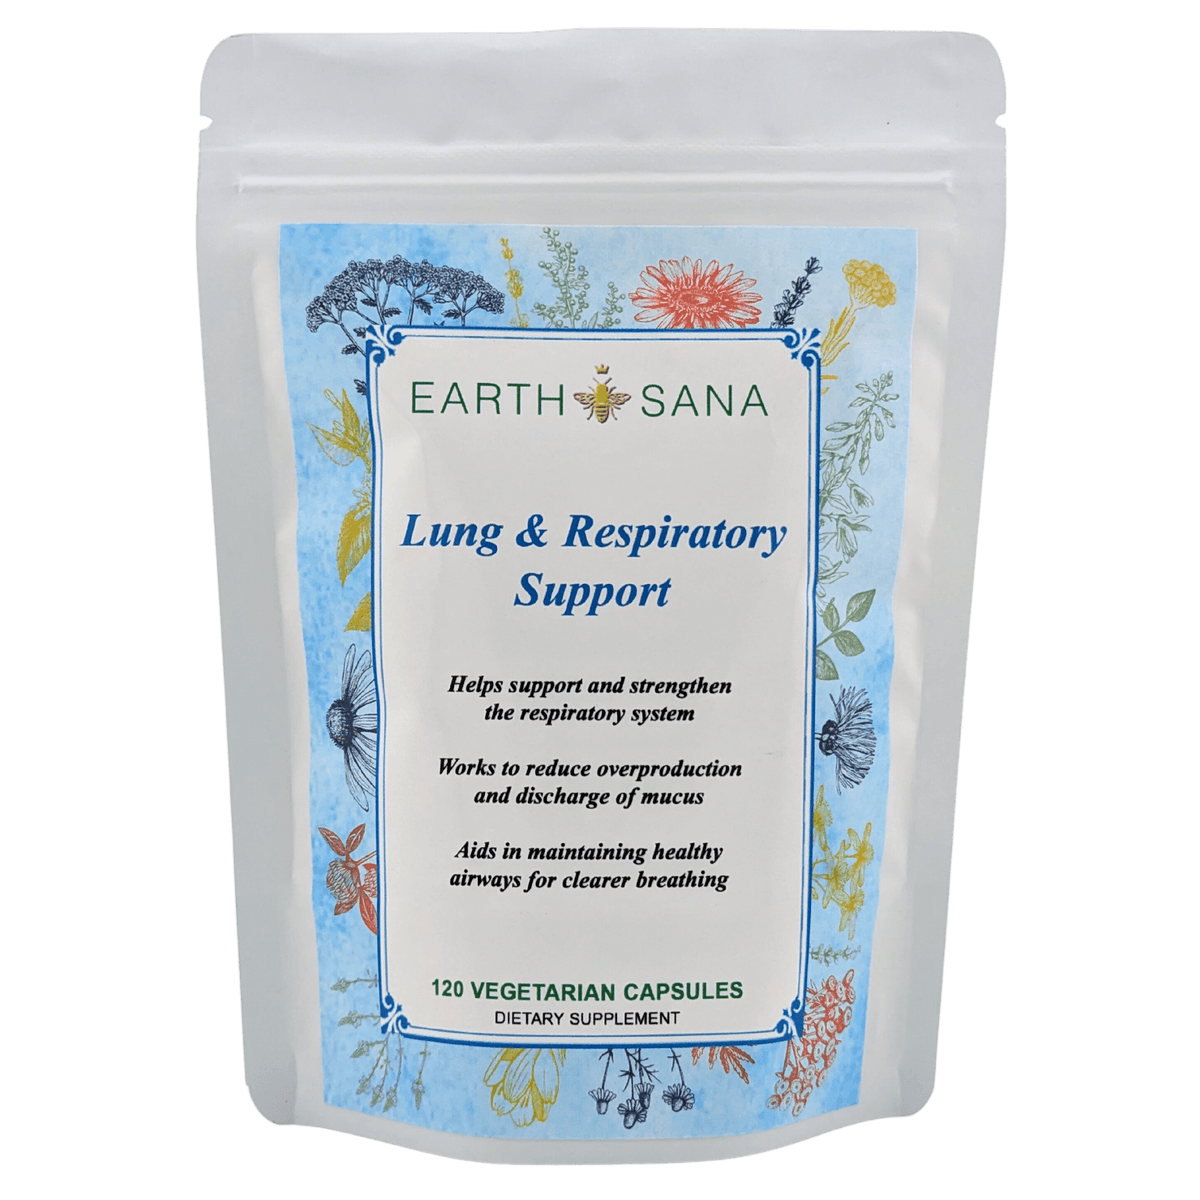 Earth Sana Lung & Respiratory Support - 120 Capsules